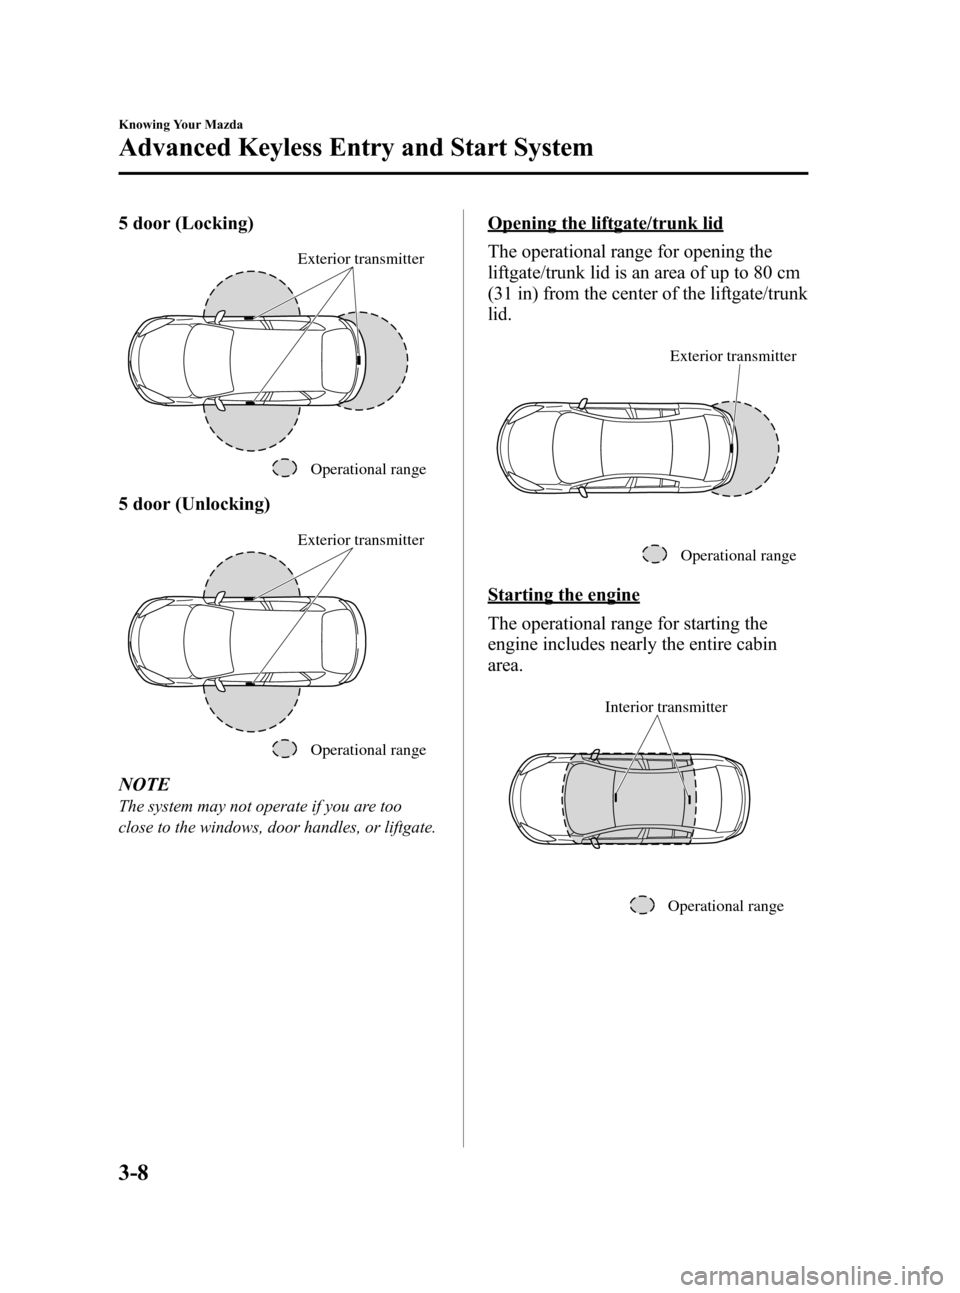 MAZDA MODEL 3 HATCHBACK 2012  Owners Manual (in English) Black plate (86,1)
5 door (Locking)
Operational range
Exterior transmitter
5 door (Unlocking)
Operational range
Exterior transmitter
NOTE
The system may not operate if you are too
close to the windows